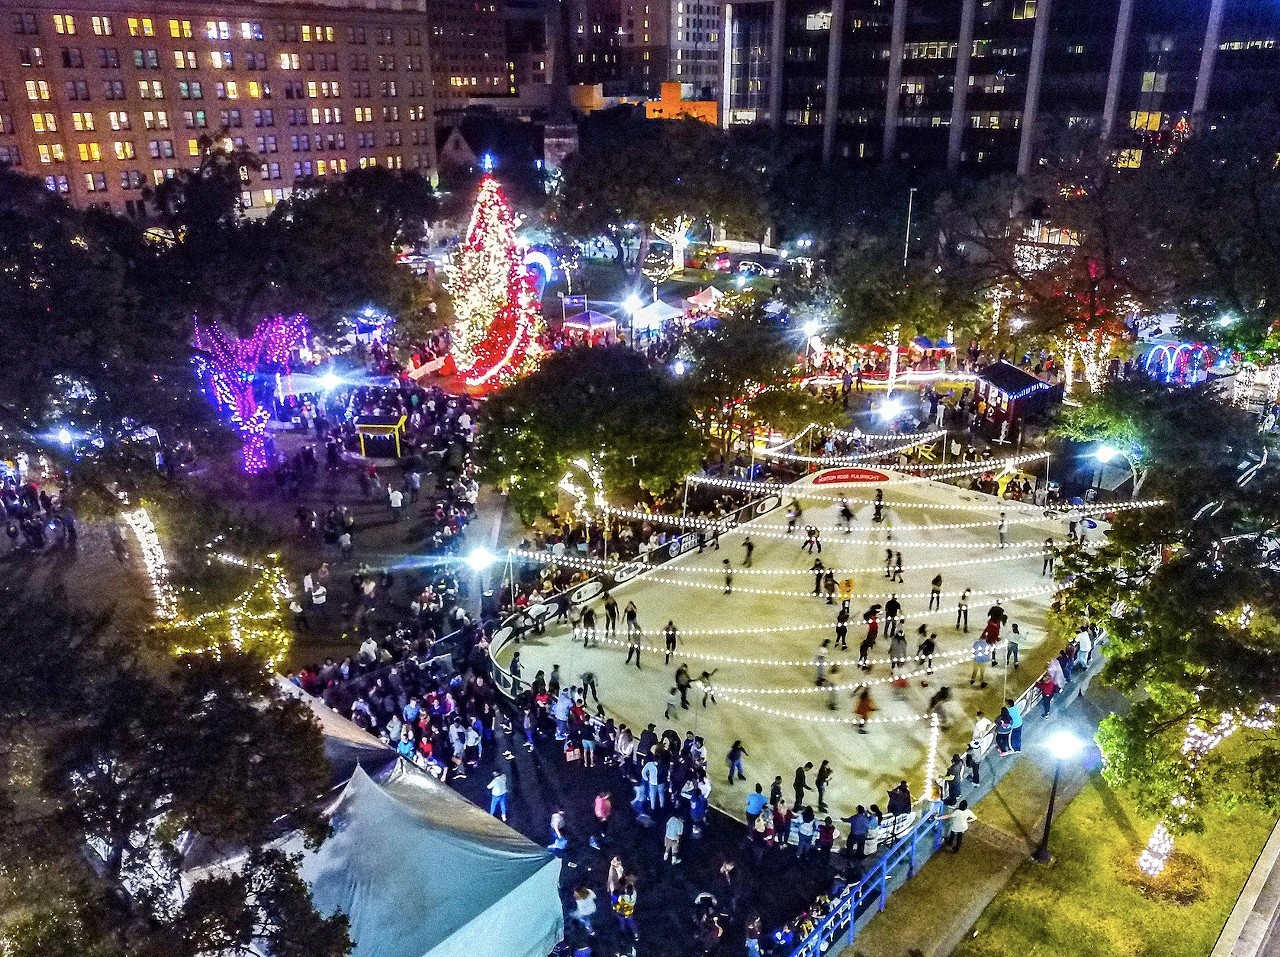 Go skating at the Rotary Ice Rink
301 E. Travis St., rotaryicerink.com
This is the Alamo City’s new favorite holiday tradition for a reason. The ice rink opens in Travis Park at the end of each year to provide wholesome wintertime fun.